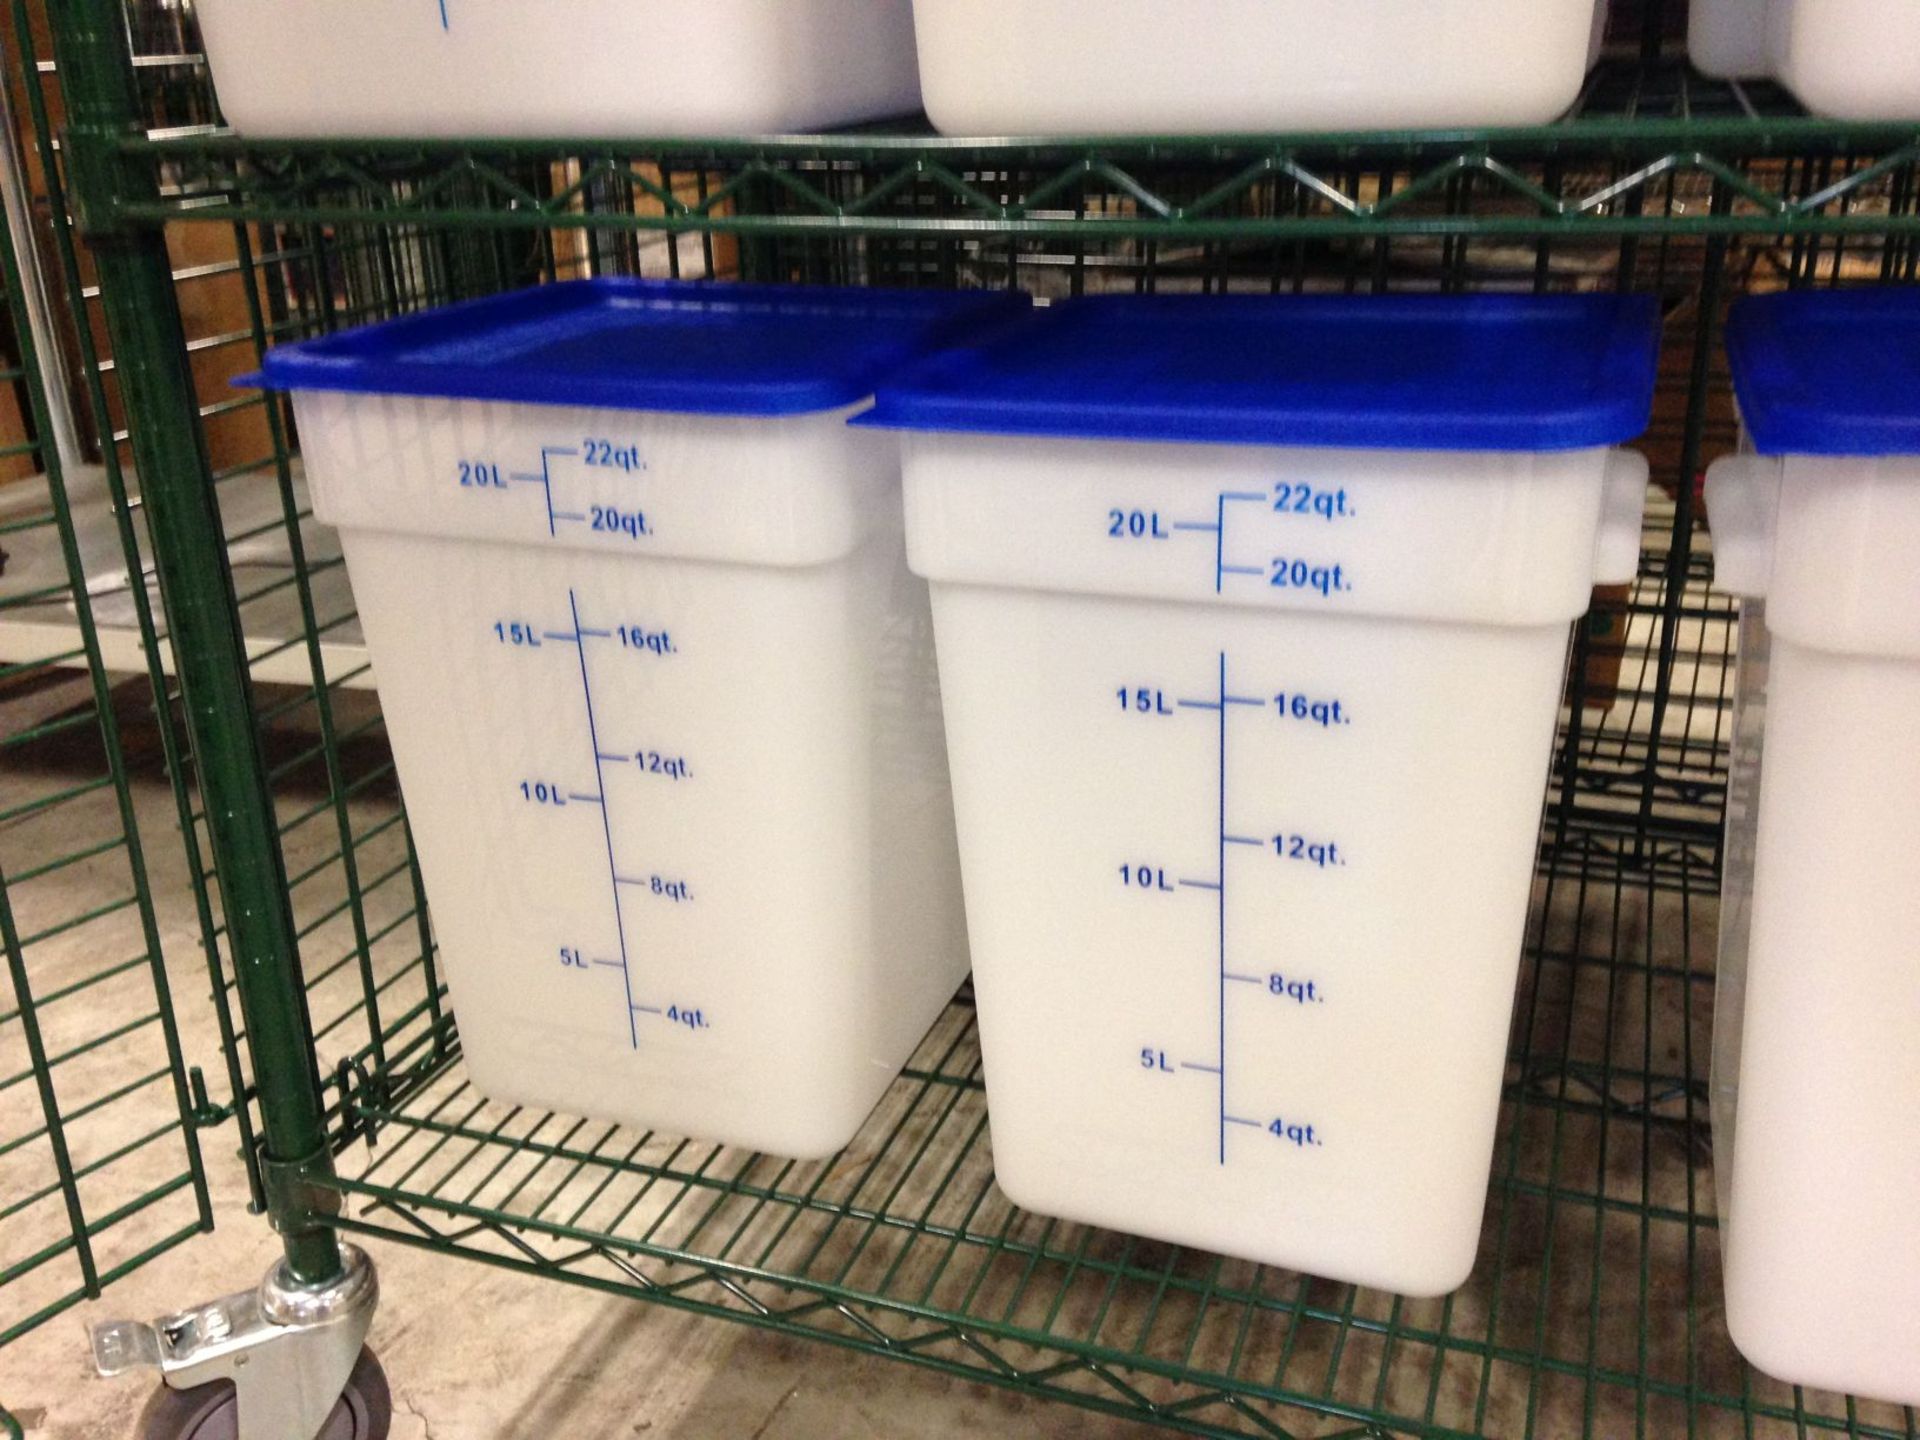 22qt Ingredient Bins with Lids - Lot of 2